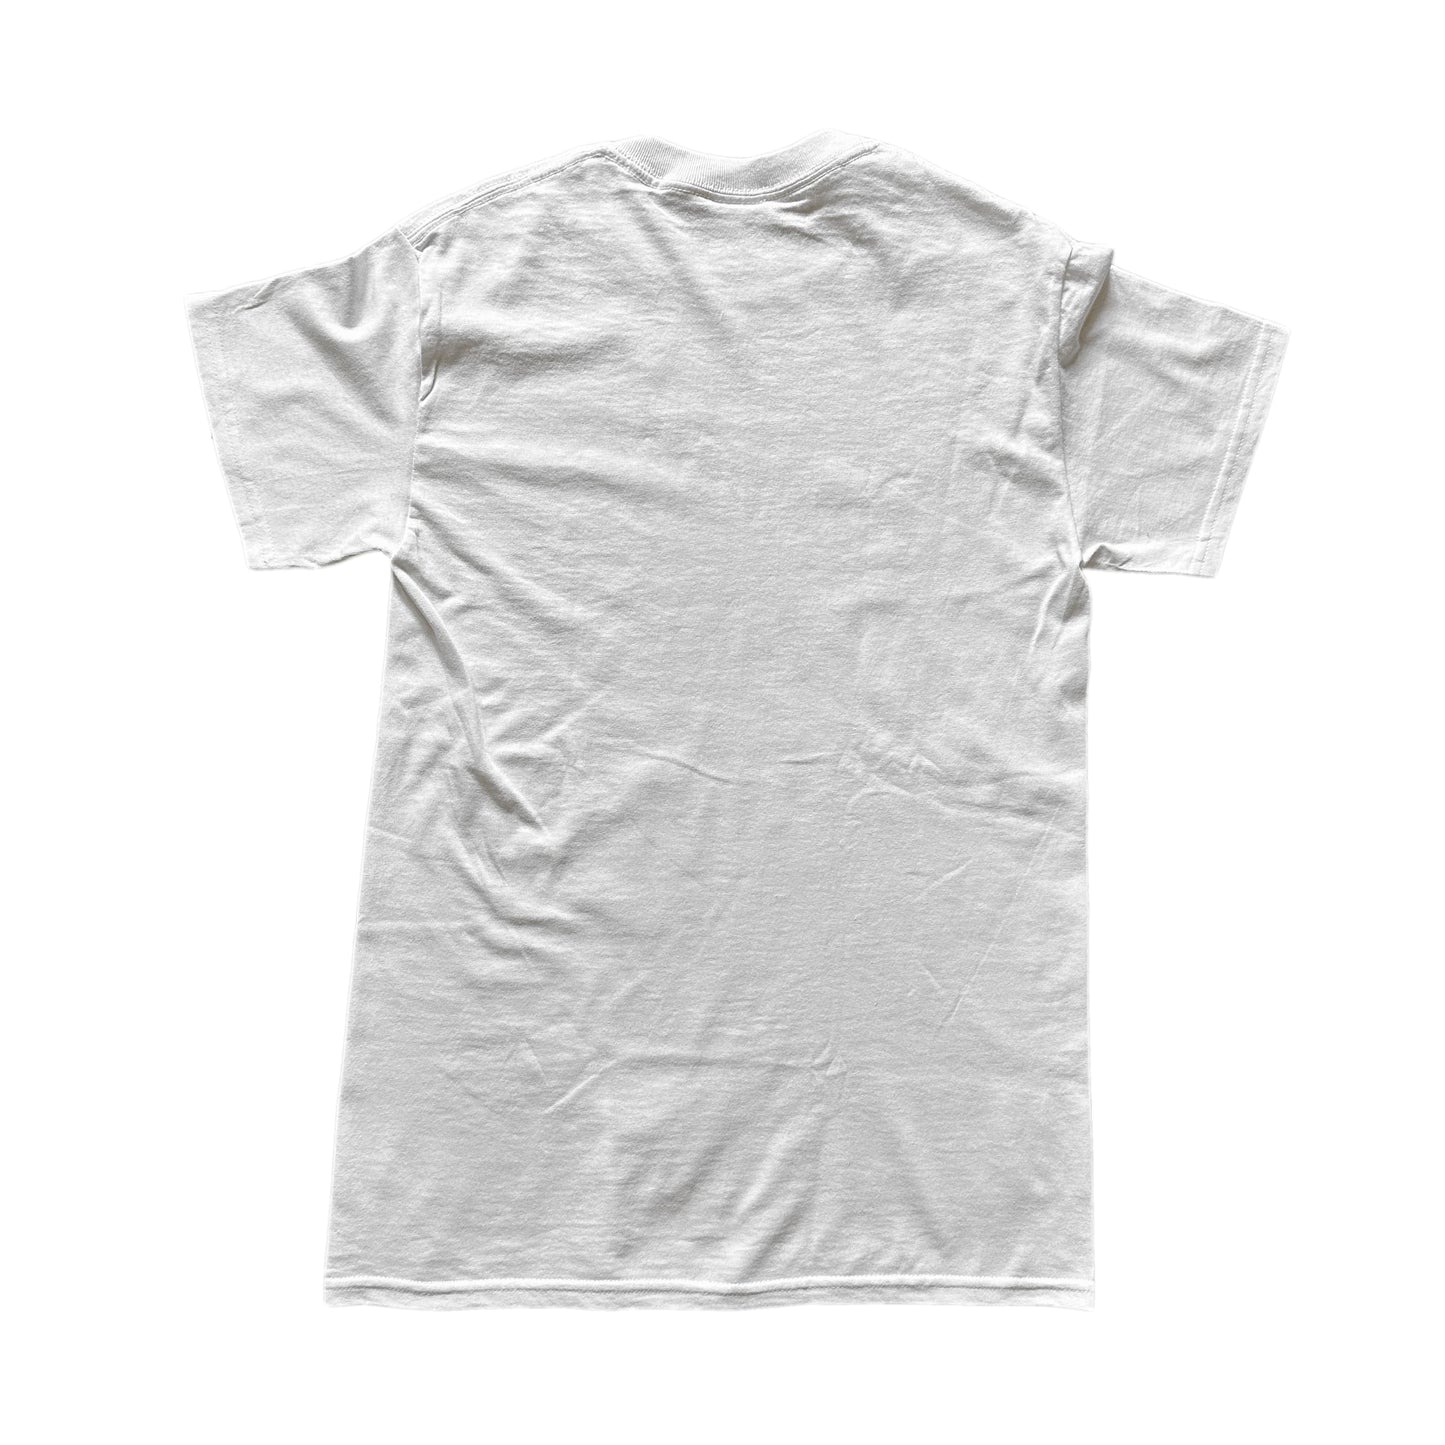 Golden Age 36 Chambers Tee White